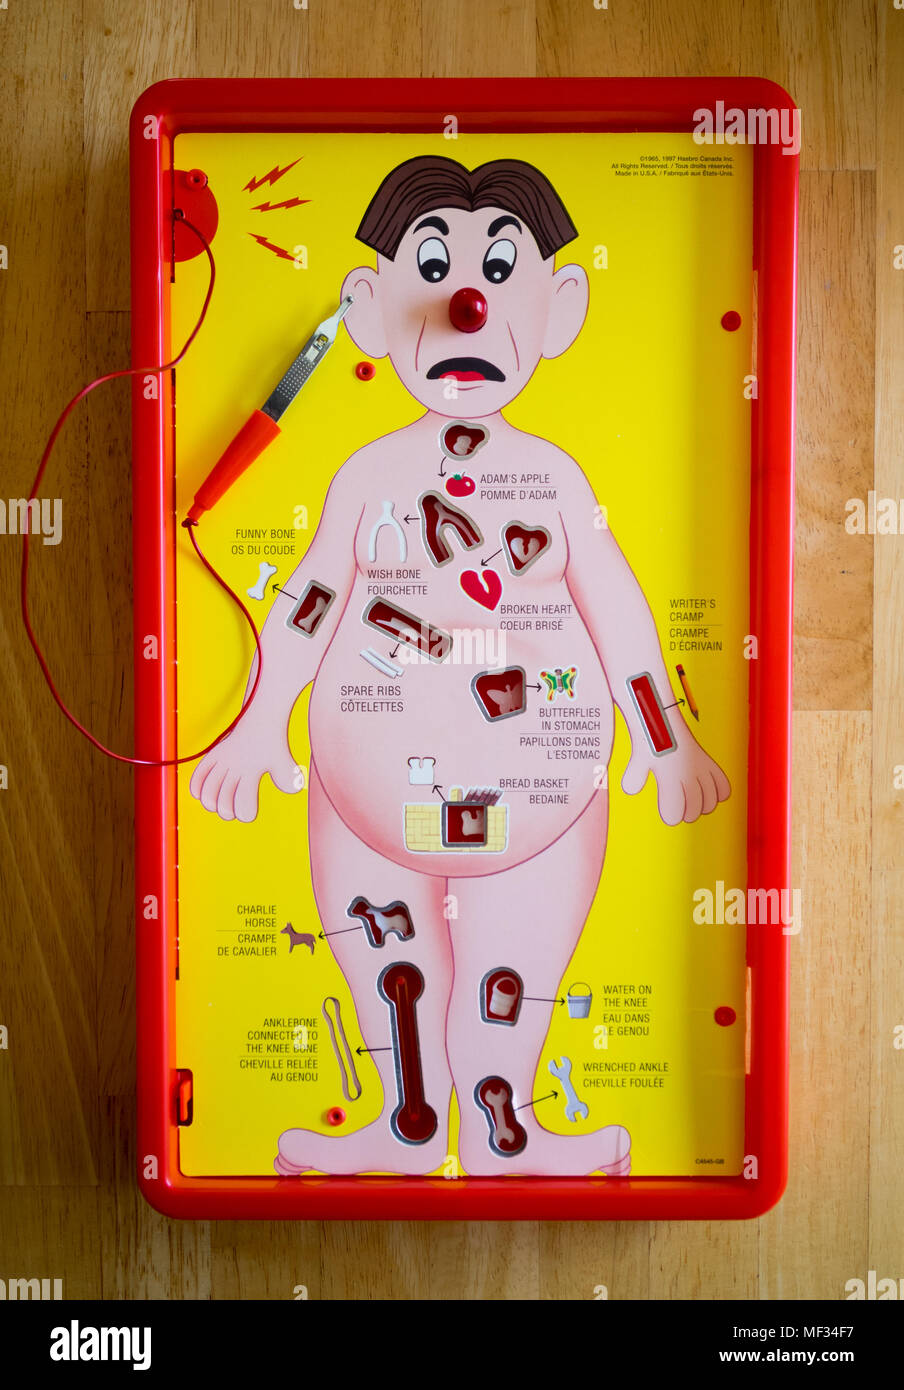 operation-a-battery-operated-board-game-initially-produced-by-milton-bradley-and-now-made-by-hasbro-MF34F7.jpg